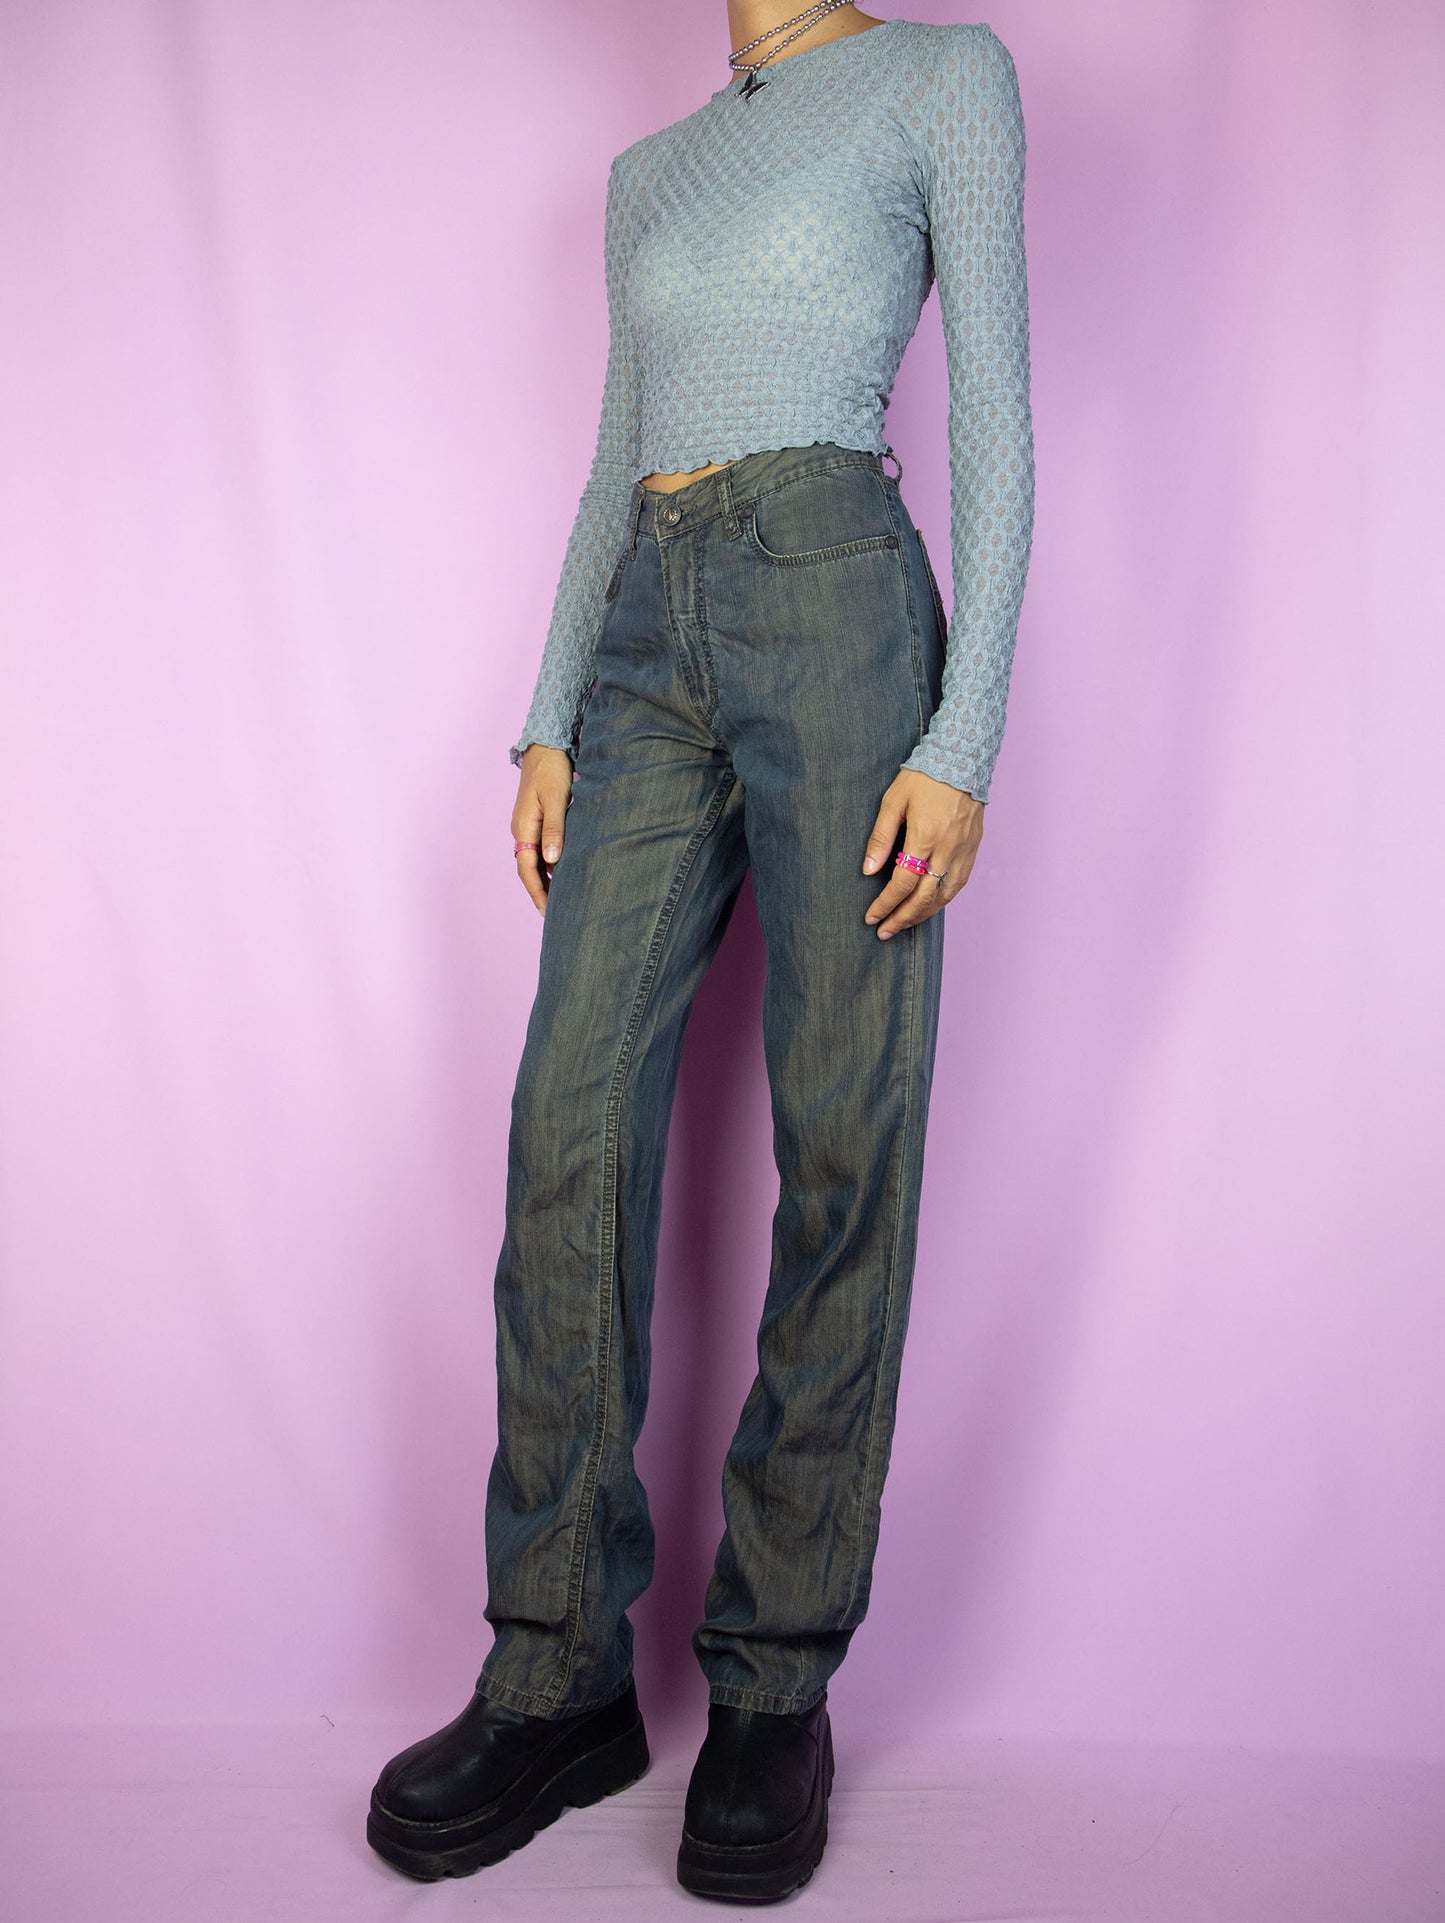 The Y2K Dark Rusty Straight Jeans are vintage 2000s high-waisted pants with a dark rusted blue effect, featuring pockets and a front zipper closure.